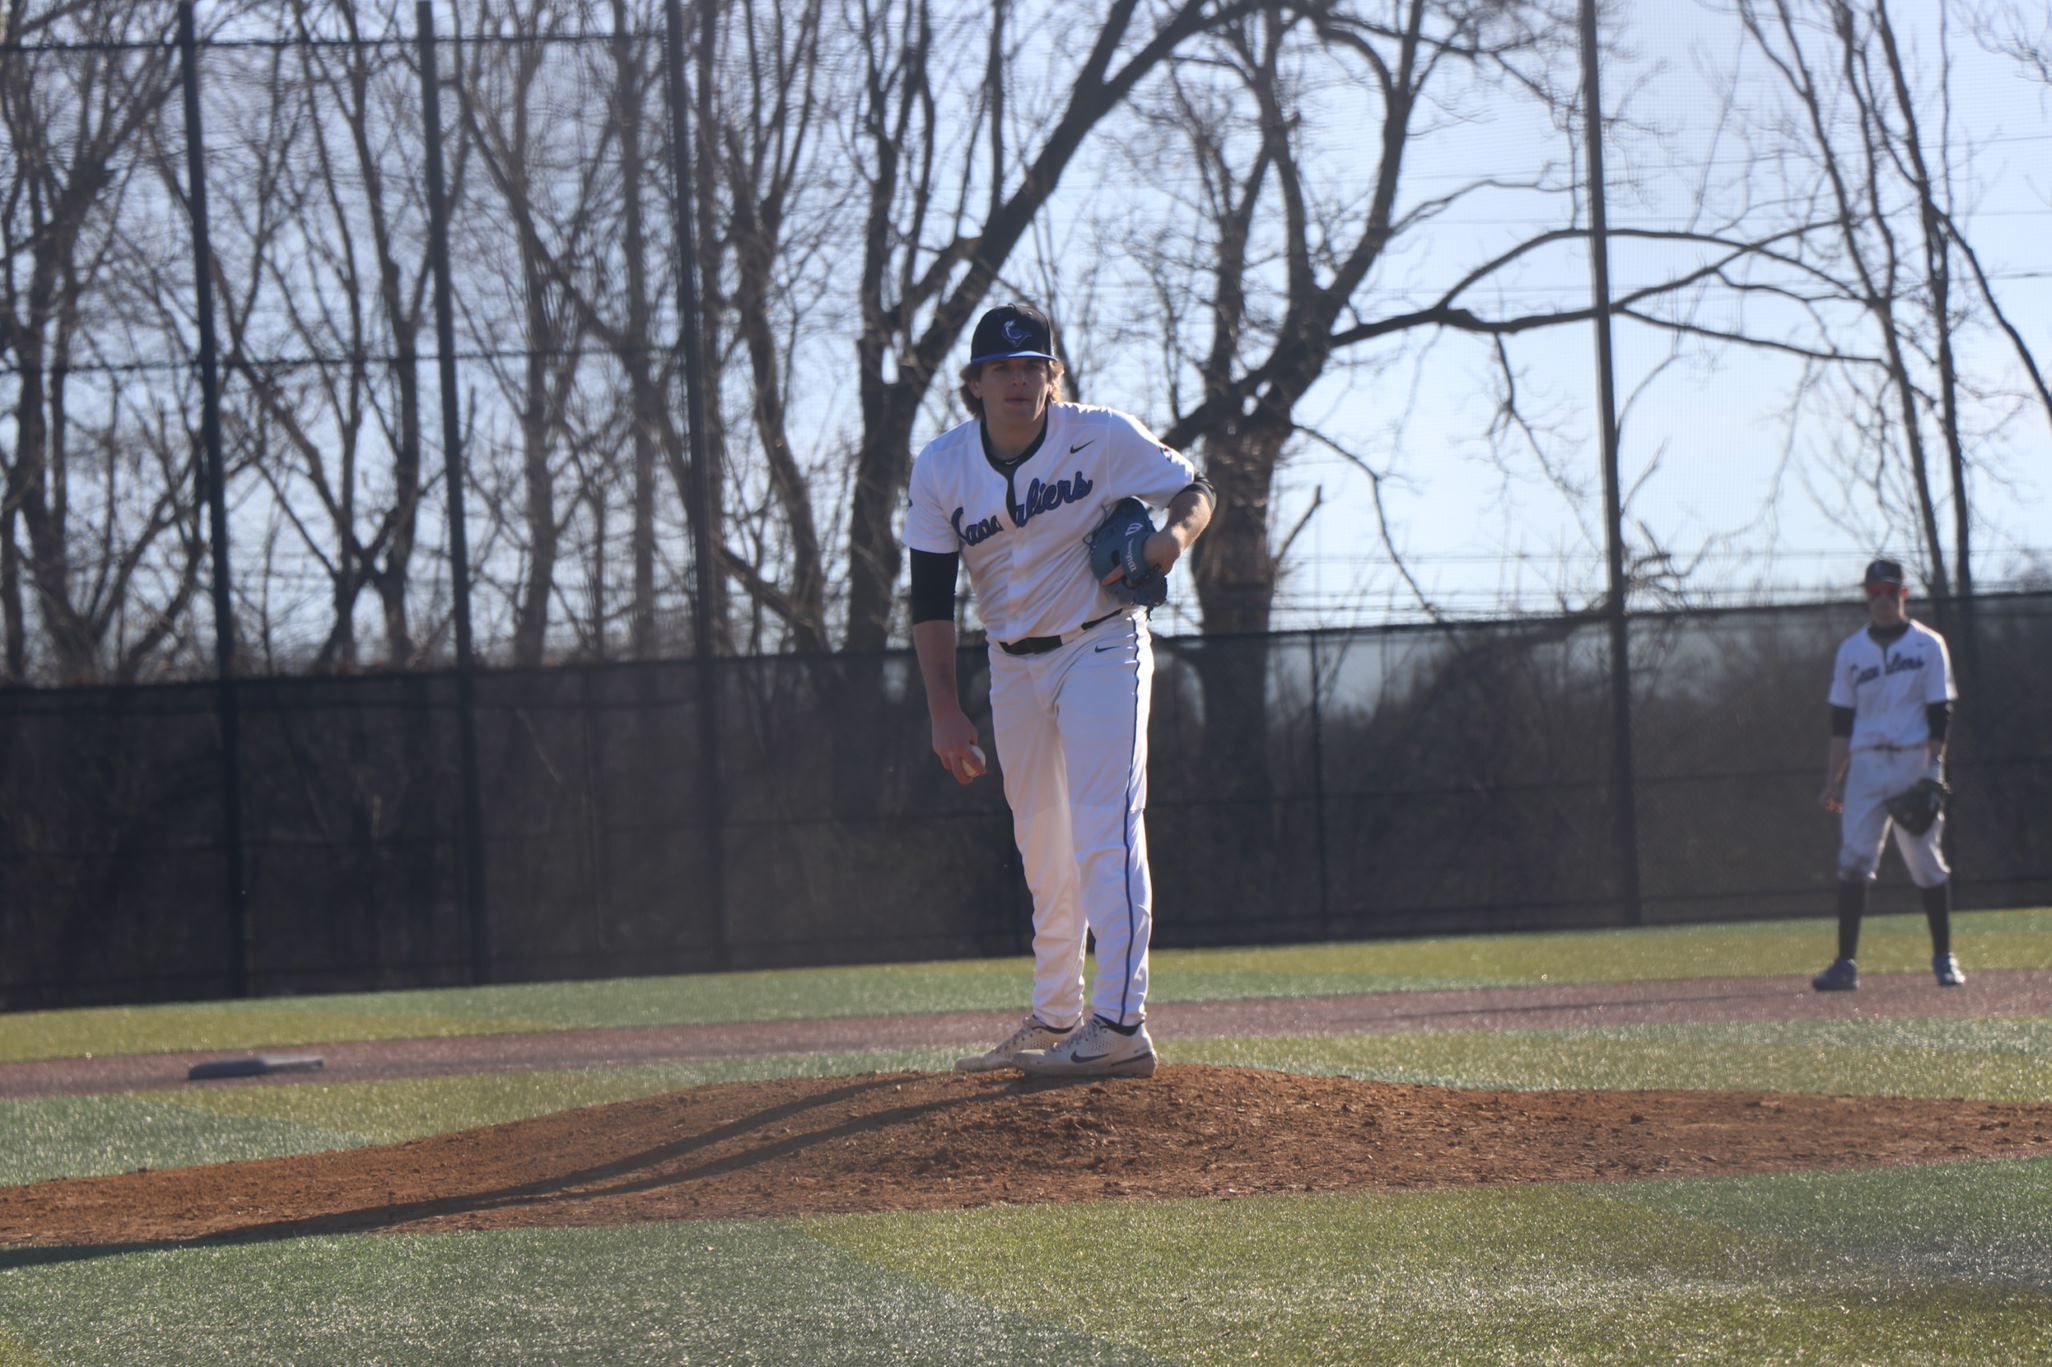 Sophomore pitcher Jordan Silvestri duels it out on the mound. Photo by Samantha Taddei.